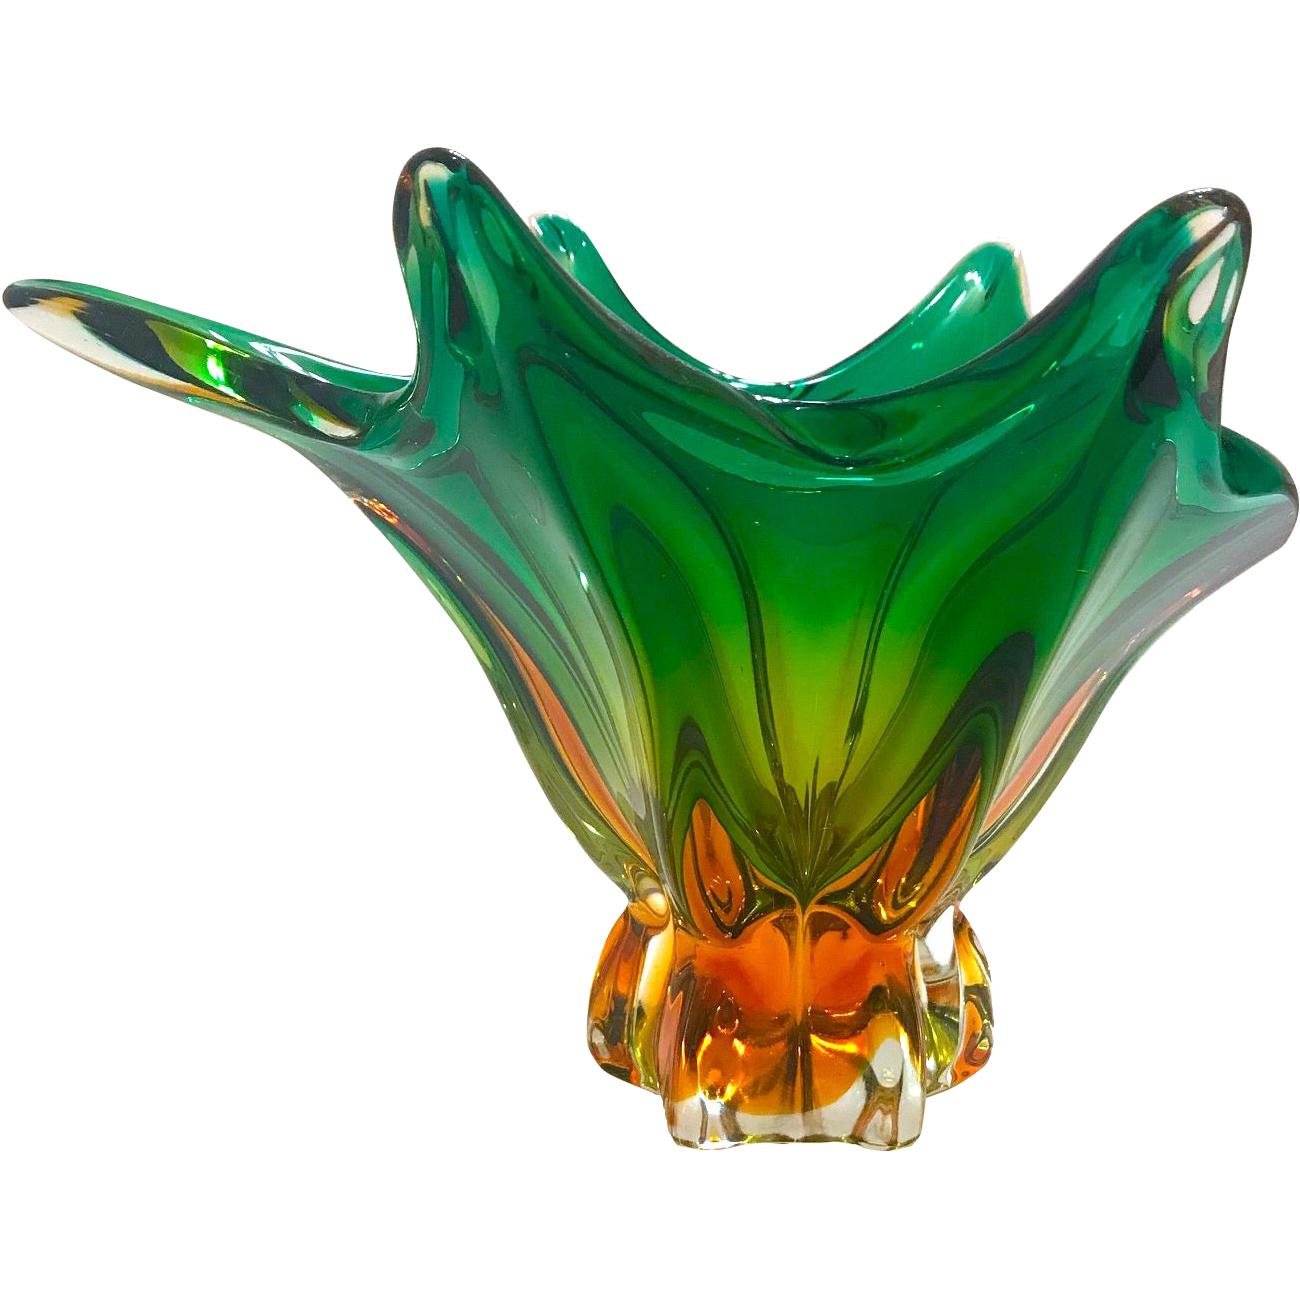 1950s Abstract Murano Sommerso Vase in Emerald and Amber Hues, Italy